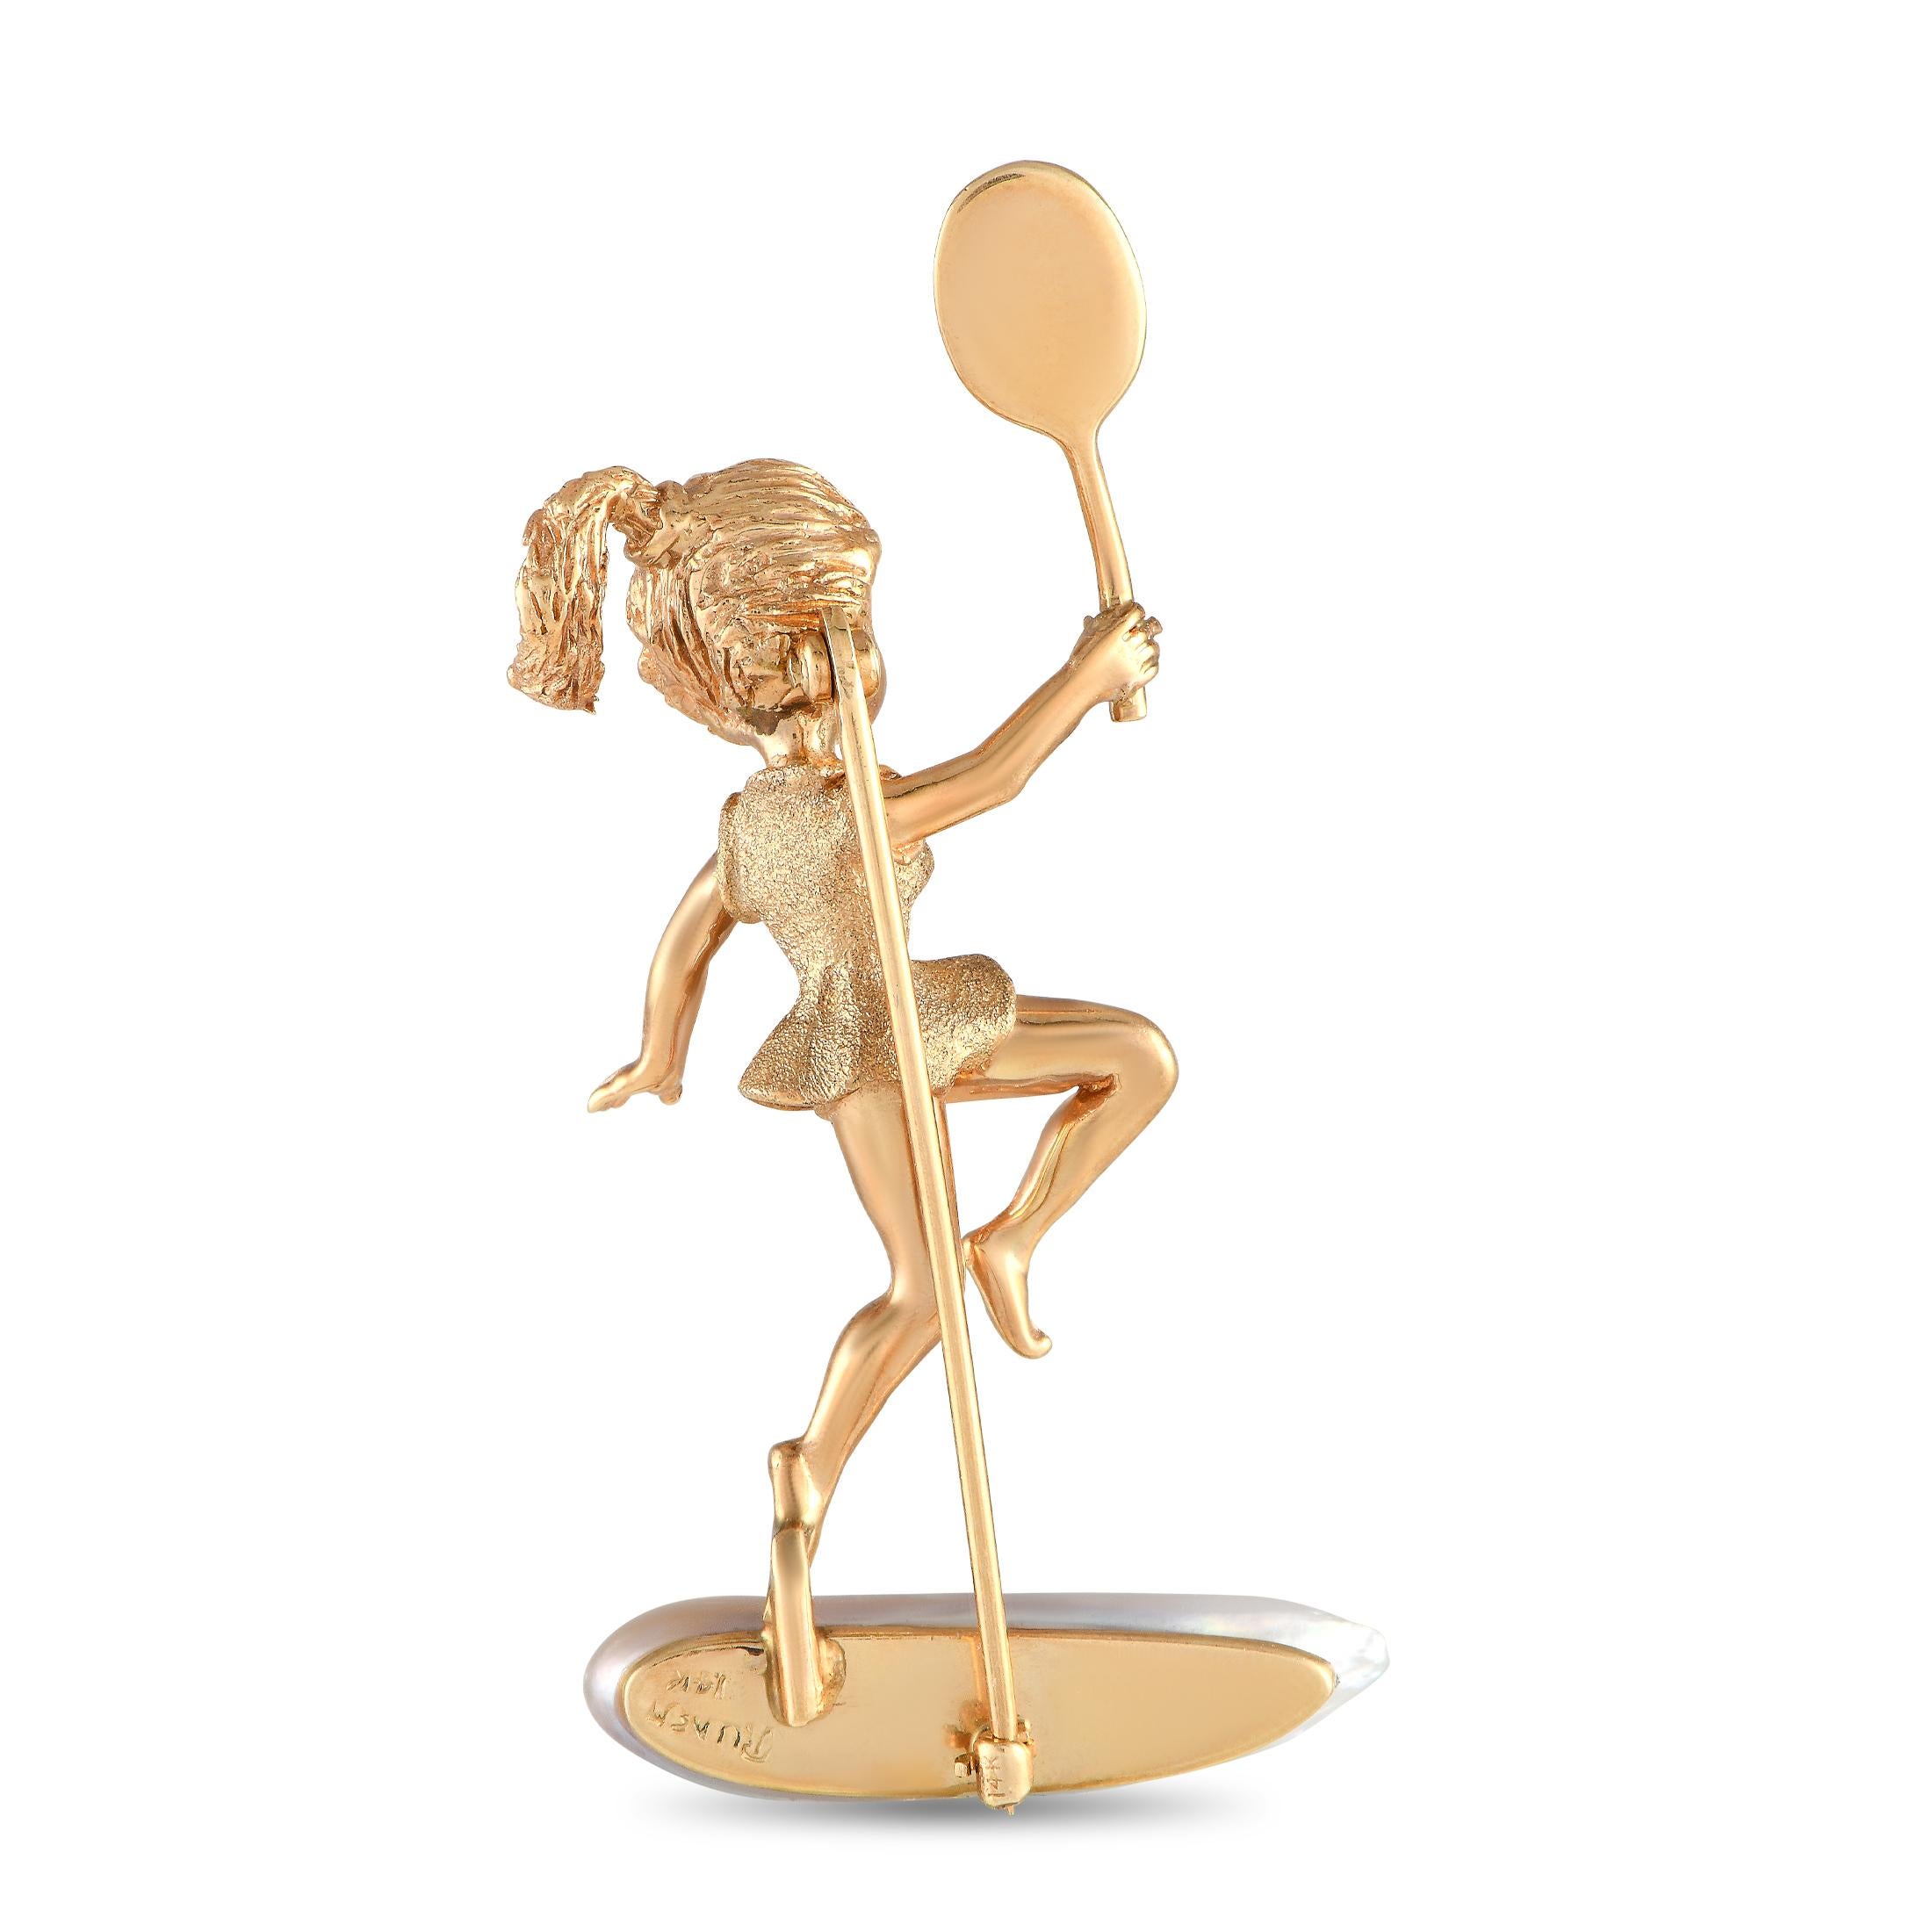 Tennis players of all ages will fall in love with this charming brooch from William Ruser. Crafted from 14K Yellow Gold, it measures 2.35 long by 1.15 wide and depicts a girl holding a tennis racket. Pearl accents add extra visual impact to this